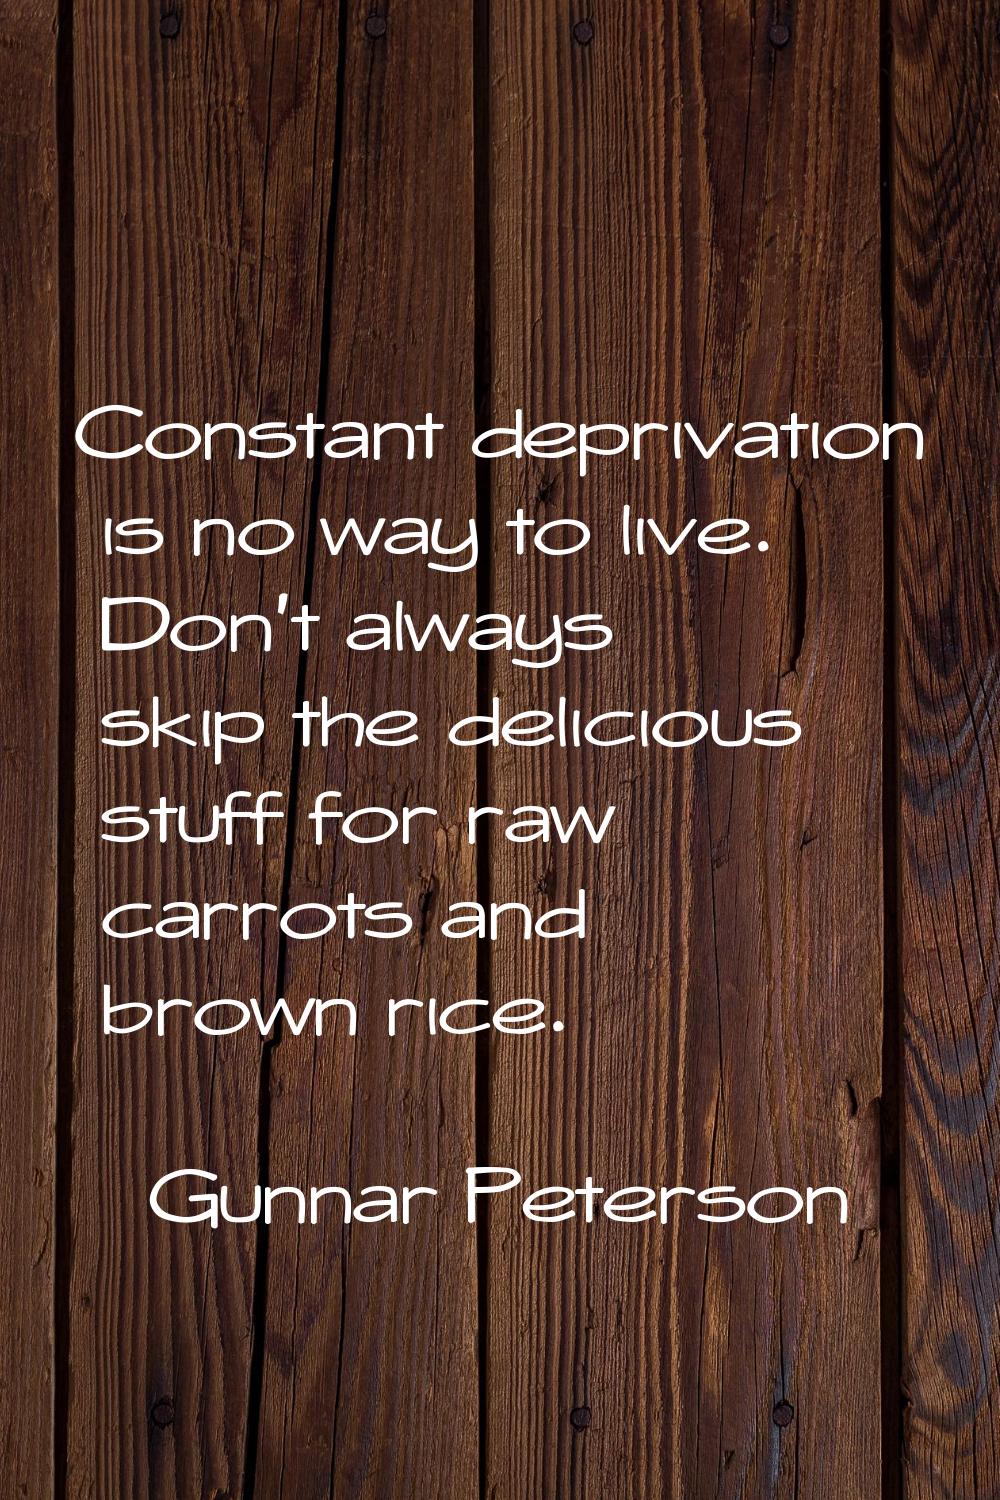 Constant deprivation is no way to live. Don't always skip the delicious stuff for raw carrots and b